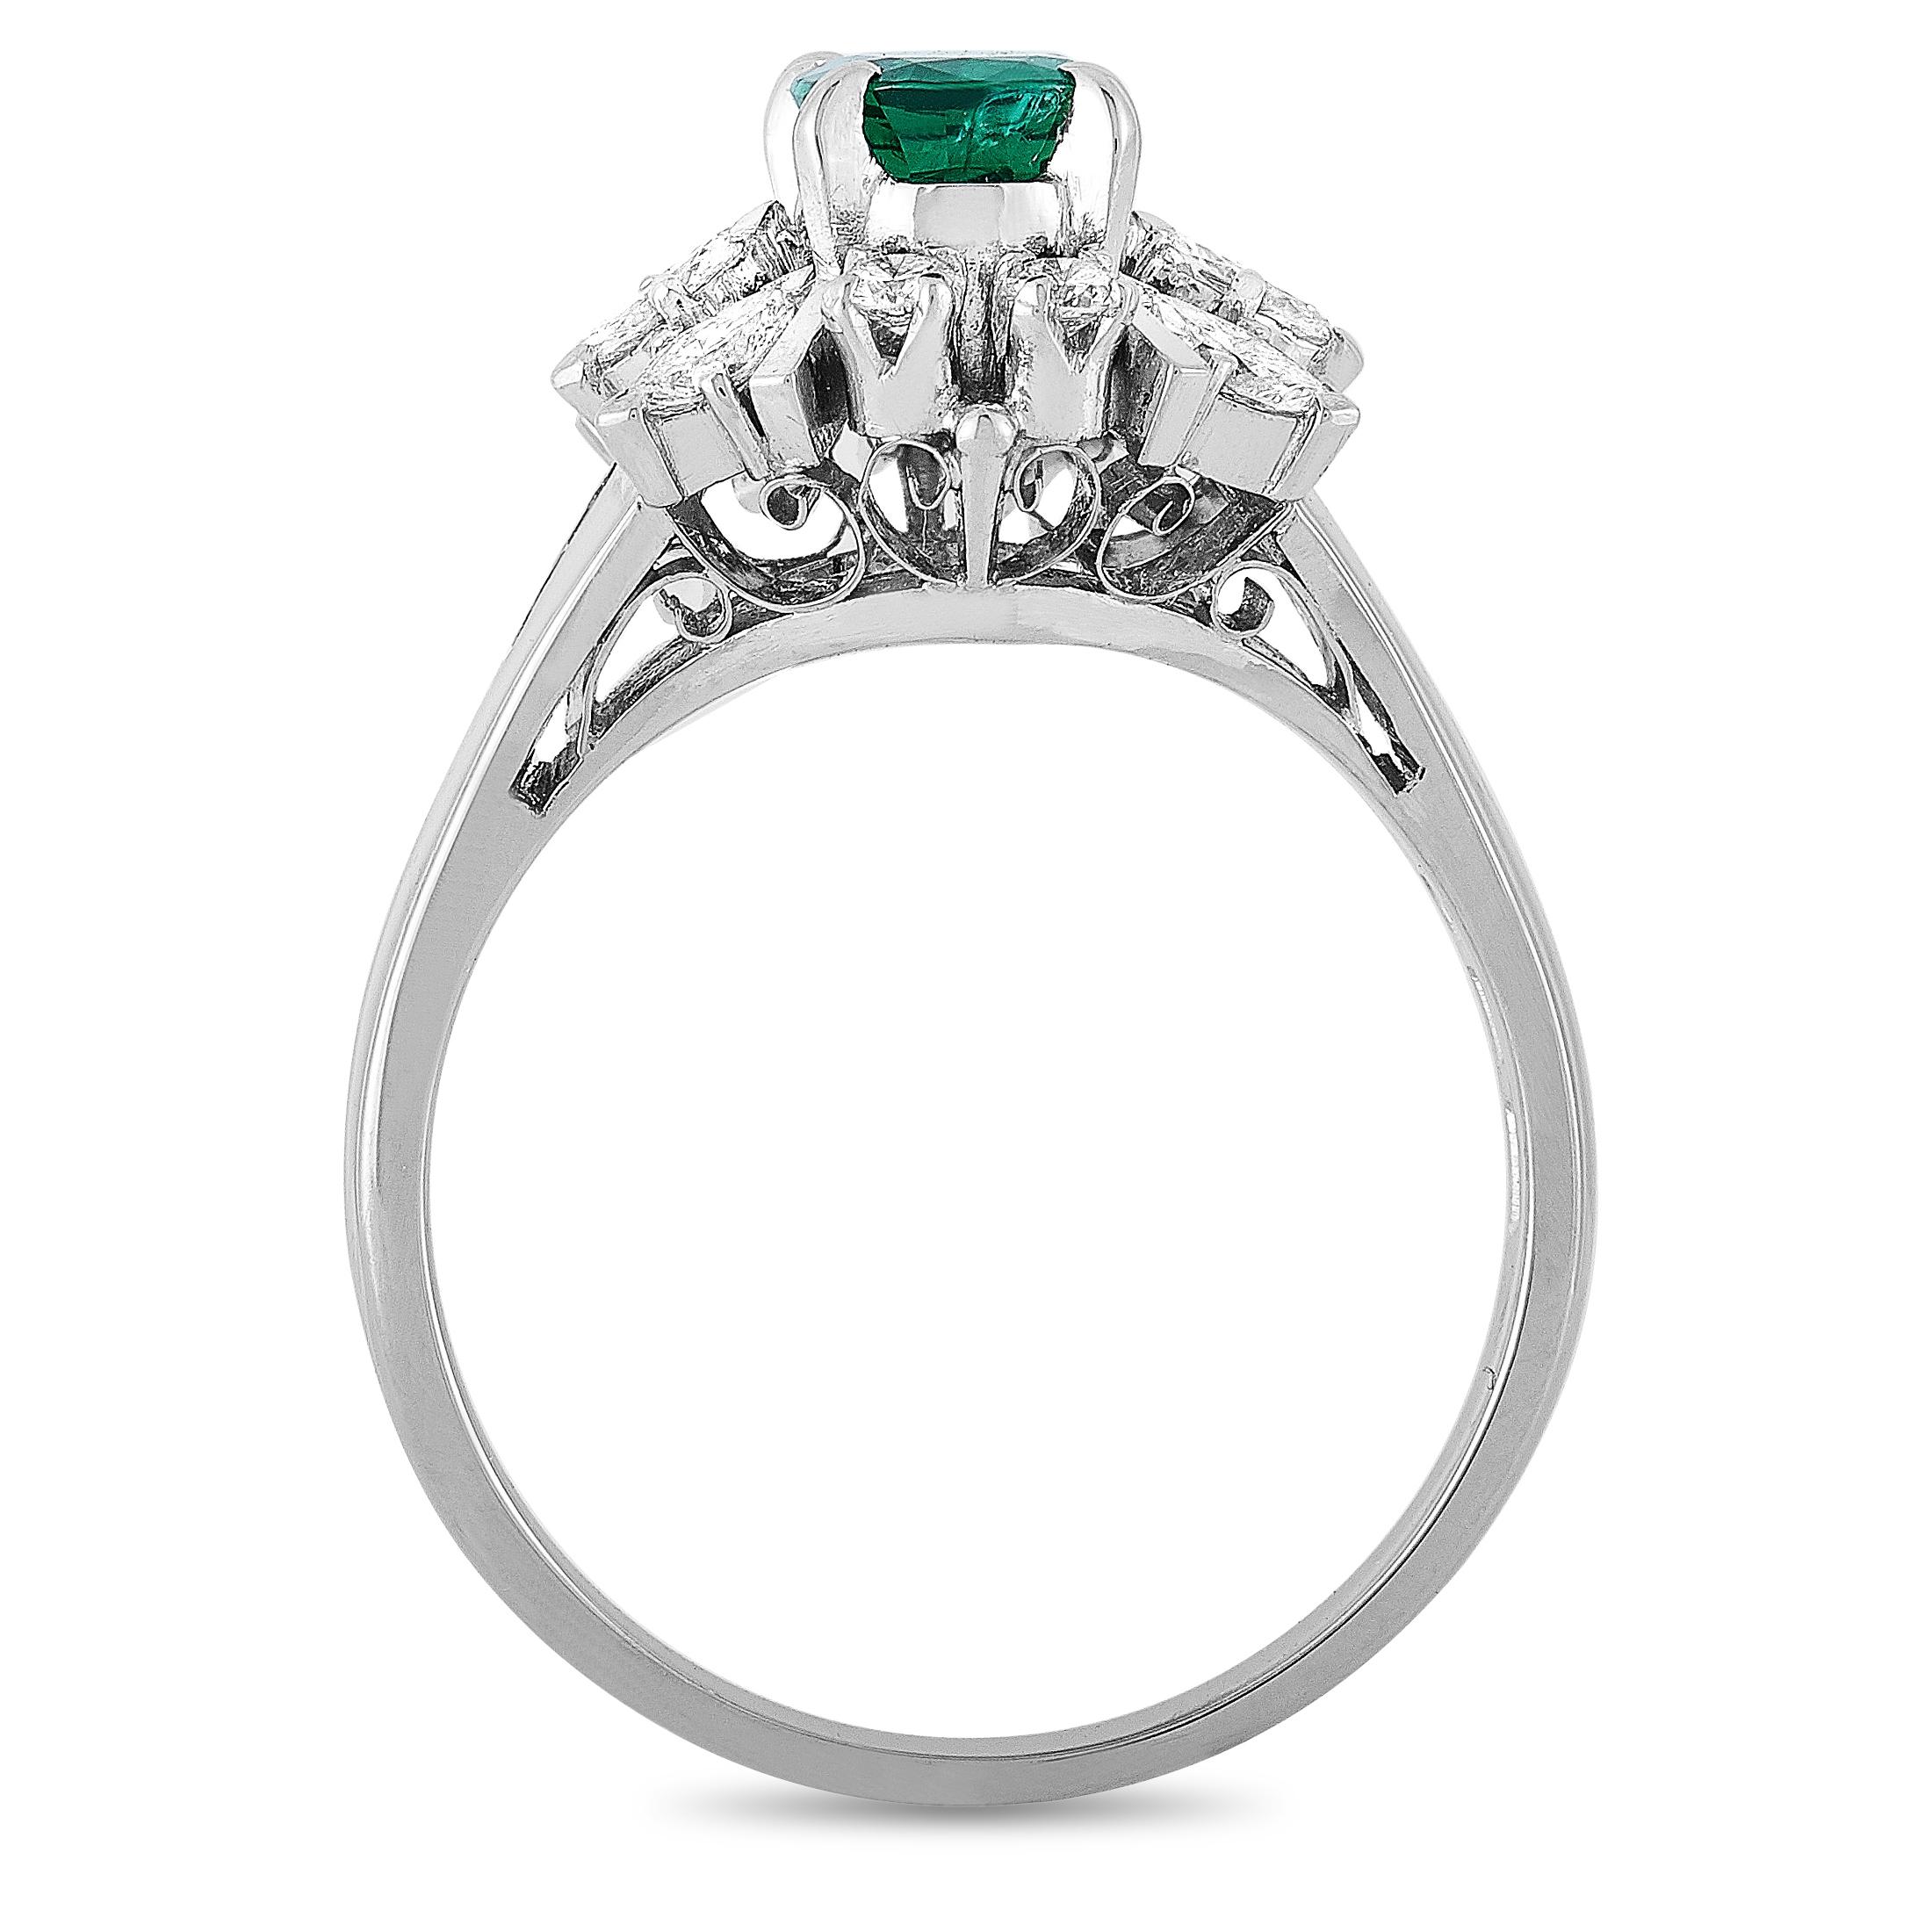 This Mikimoto ring is crafted from platinum and weighs 5.1 grams, boasting band thickness of 1 mm and top height of 8 mm, while top dimensions measure 12 by 9 mm. The ring is set with a 0.62 ct emerald and a total of 0.50 carats of diamonds.
Ring